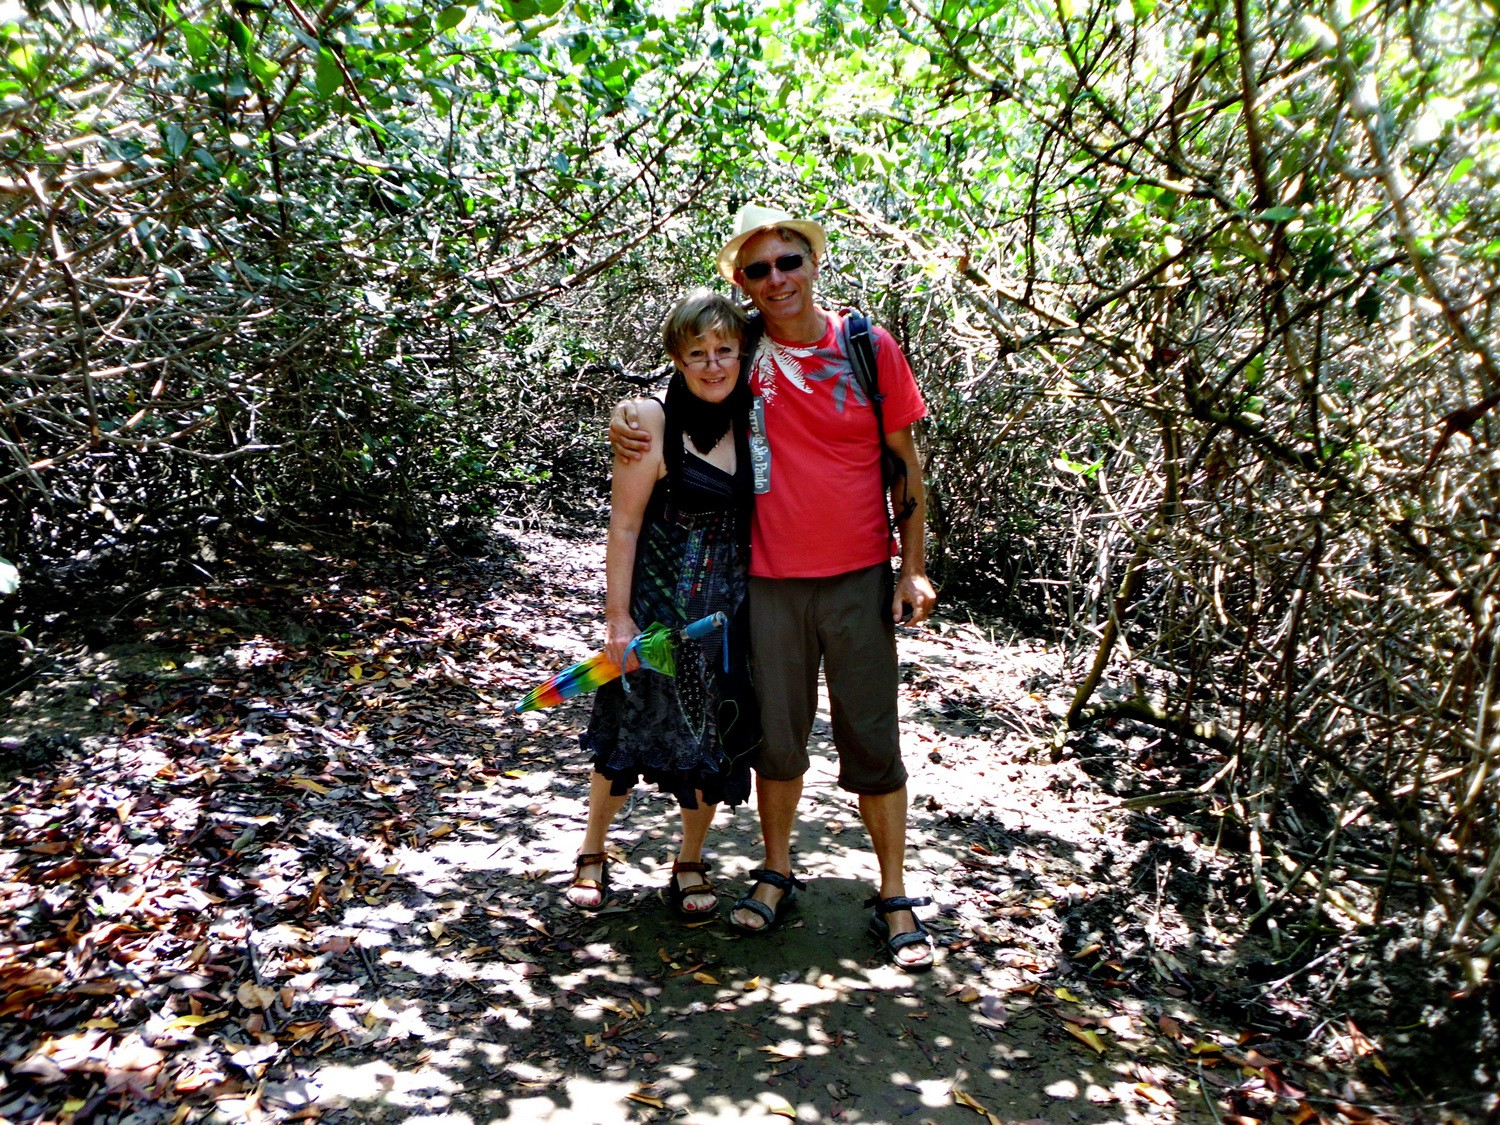 In the mangrove forest